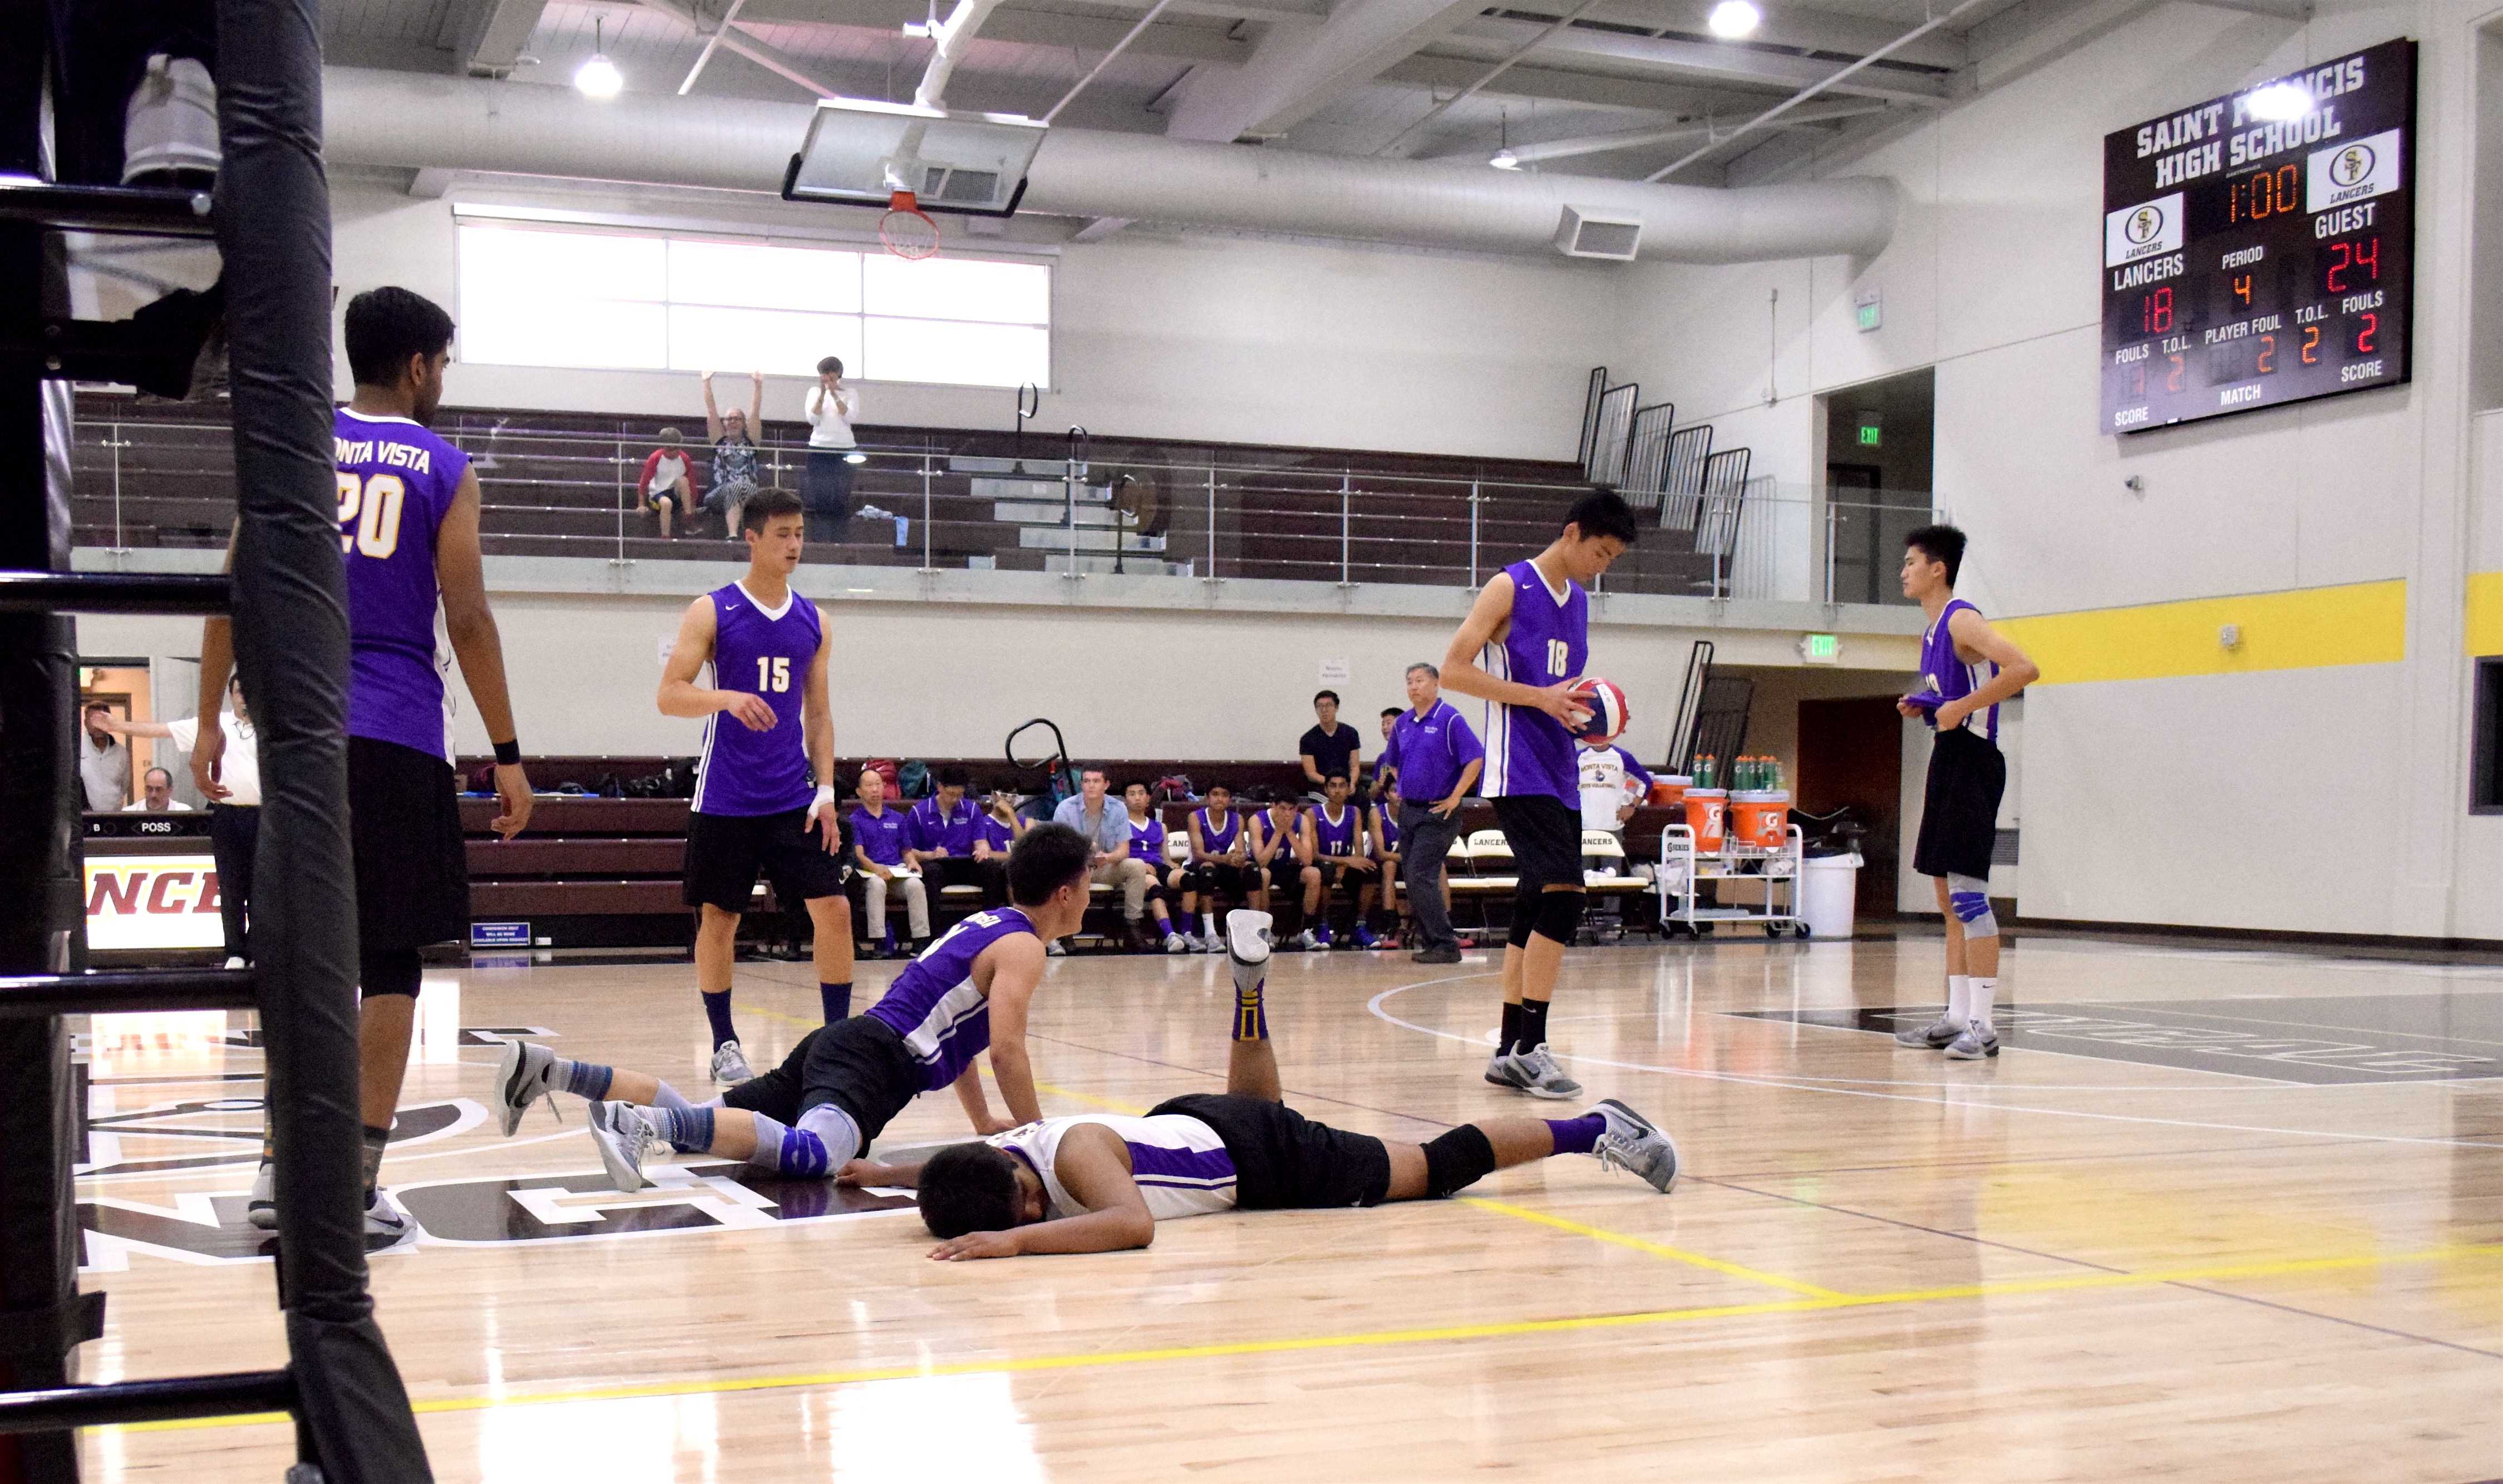 Sophomore Jason Shen and junior Prathik Rao lay on the court in shock, after missing a short ball and losing the match point. On May 14, the team lost to Bellarmine College Preparatory in the CCS semifinals 3-1. Photo by Om Khandekar